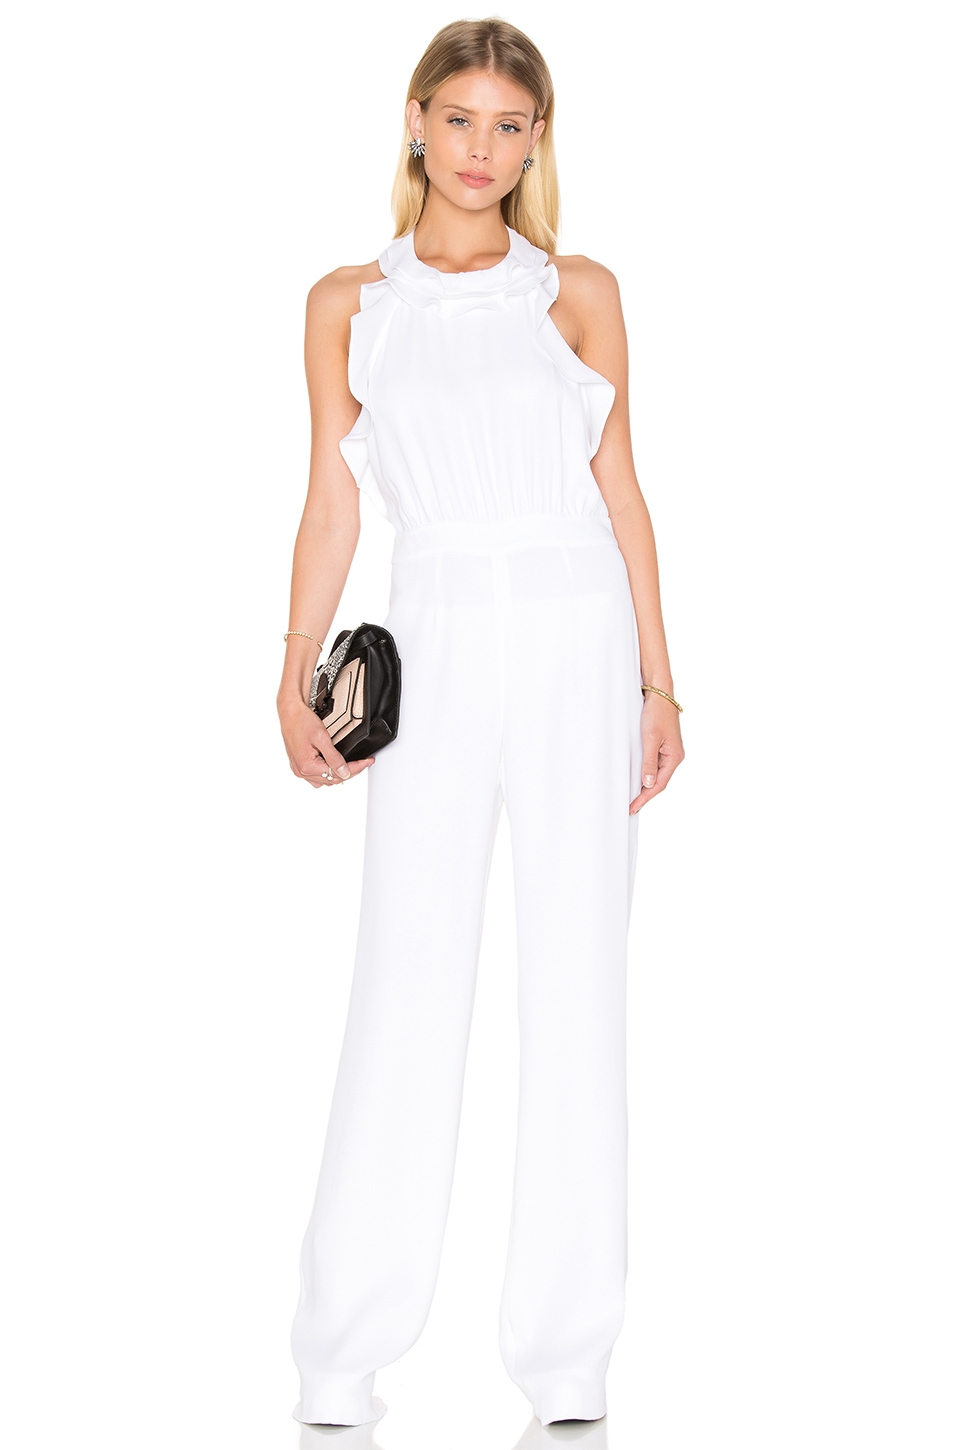 Bridal Jumpsuits and White Jumpsuits for Weddings - Dress for the Wedding